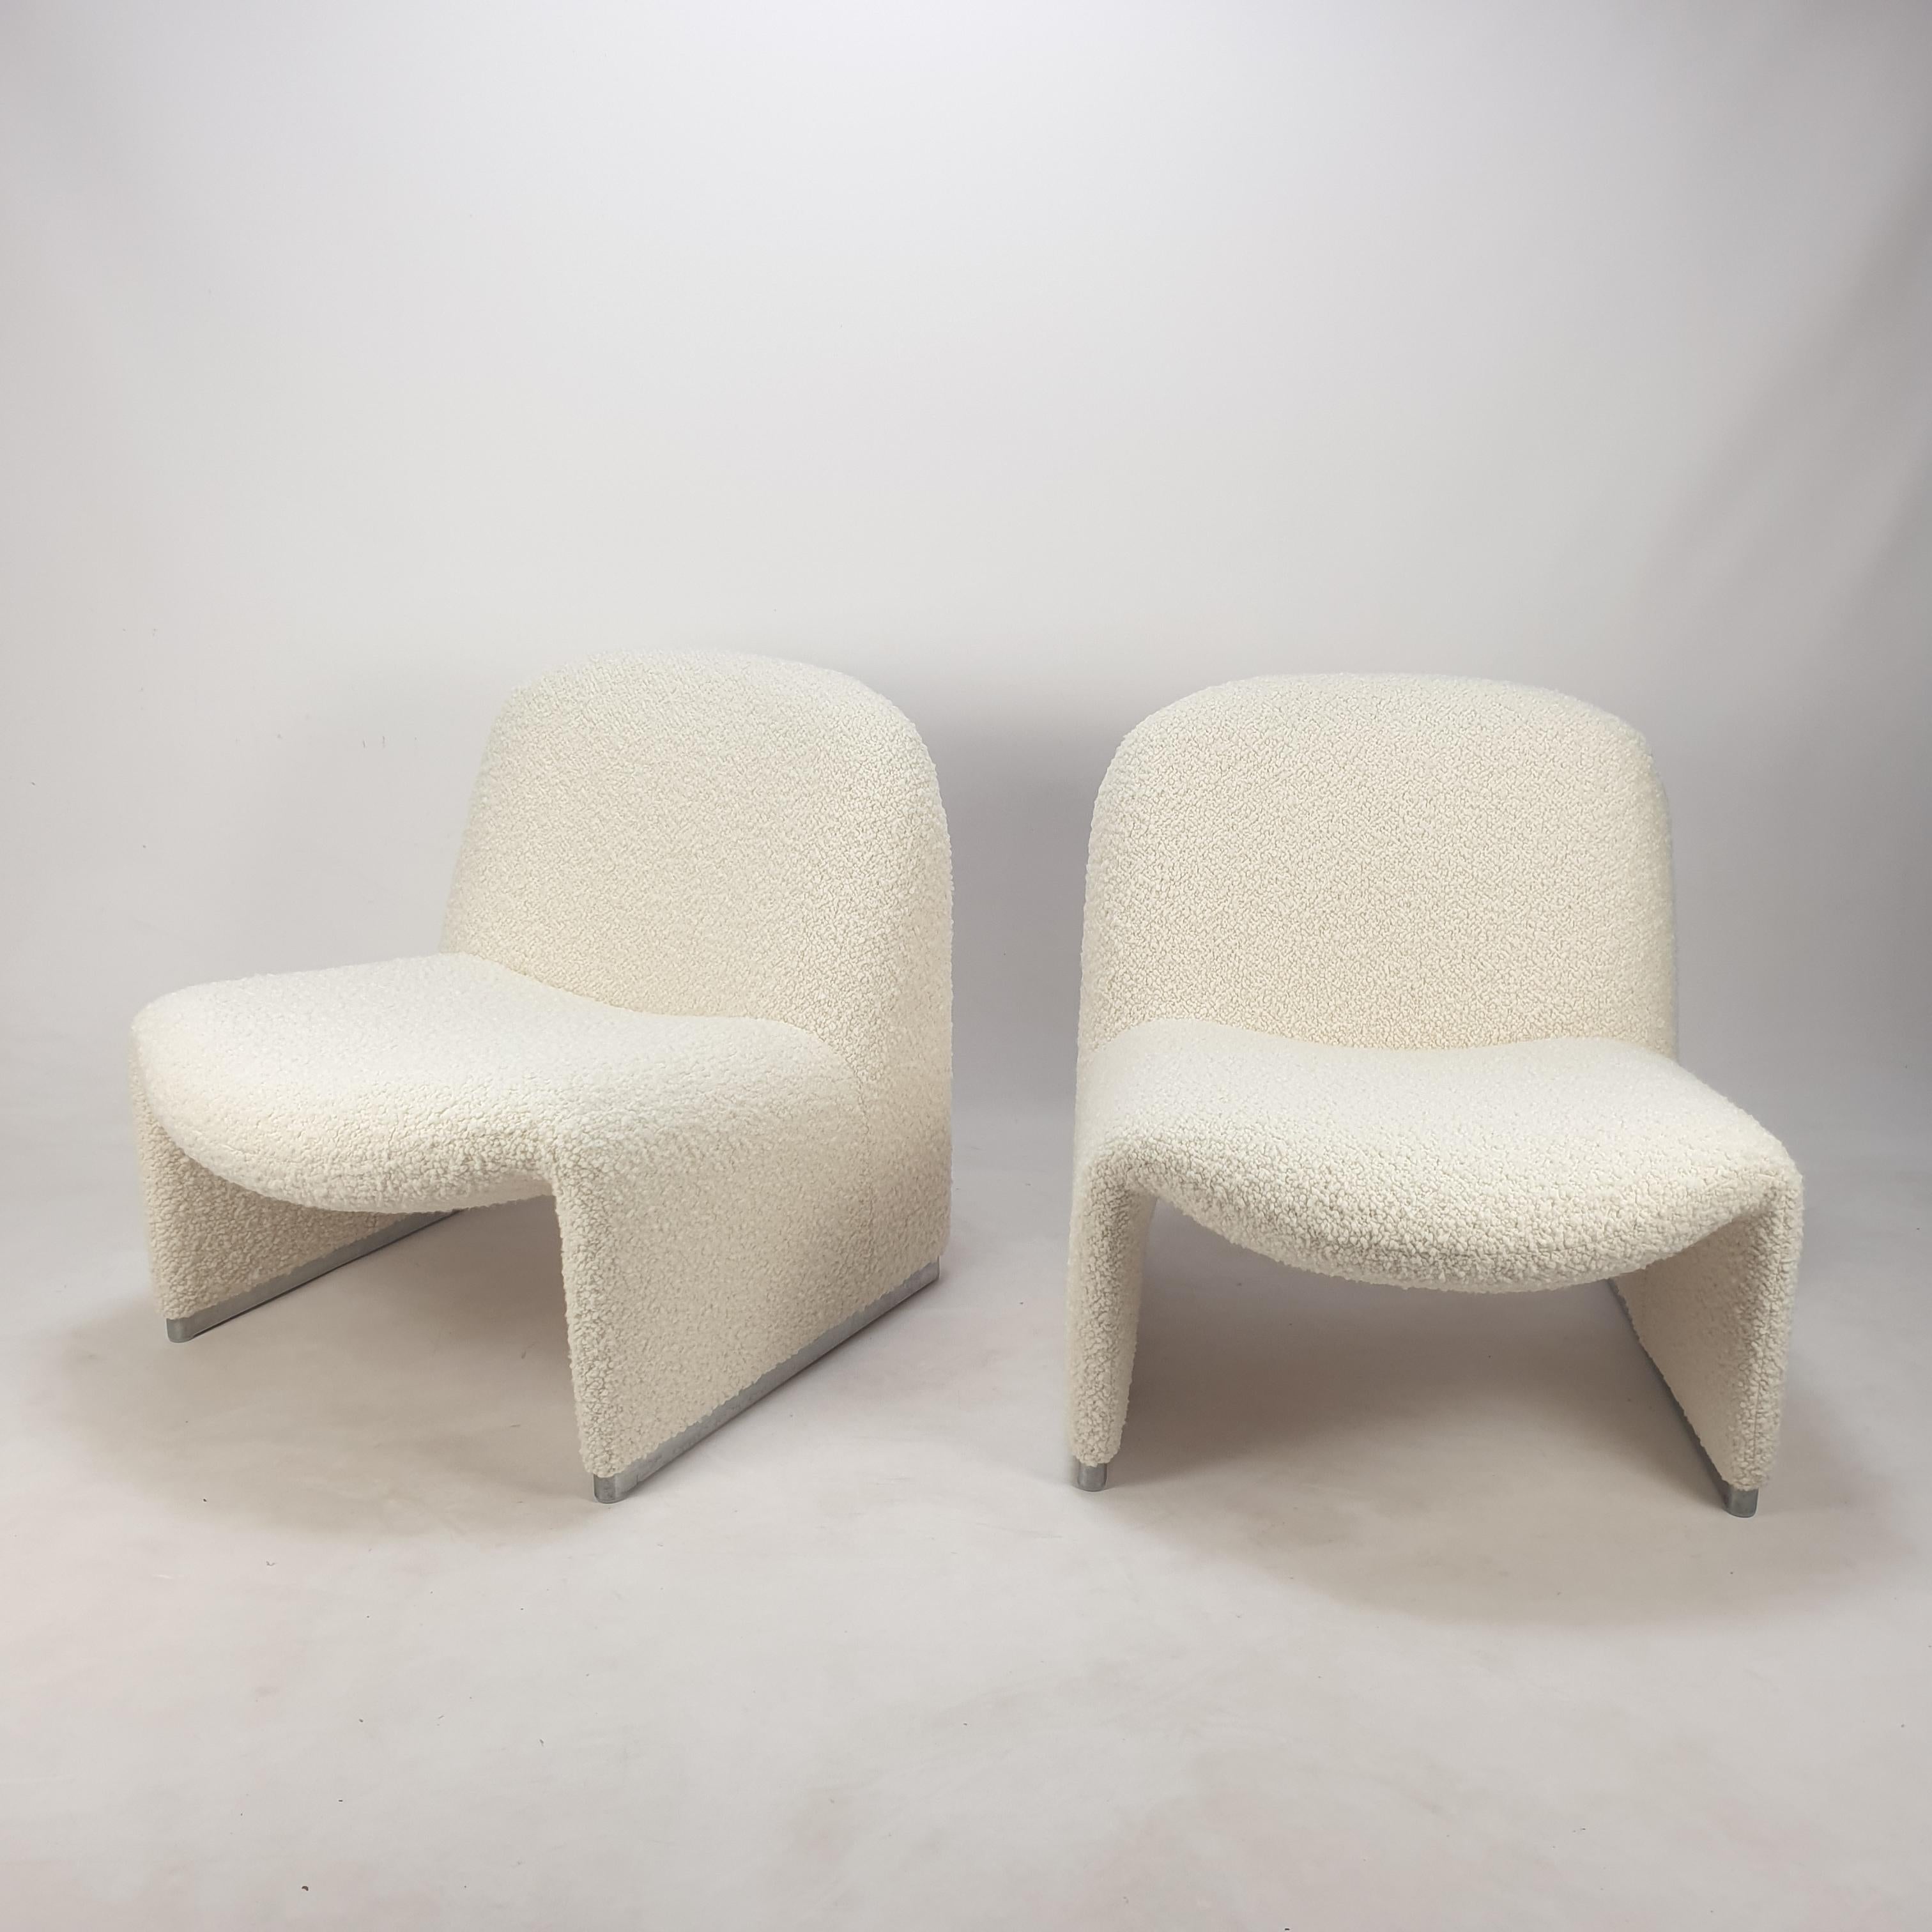 Set of 2 lovely and comfortable Alky chairs. 
Designed by Giancarlo Piretti in 1969, produced by Artifort. 

They are just restored with very soft and cosy Italian bouclé fabric. 
The chairs are in perfect condition.